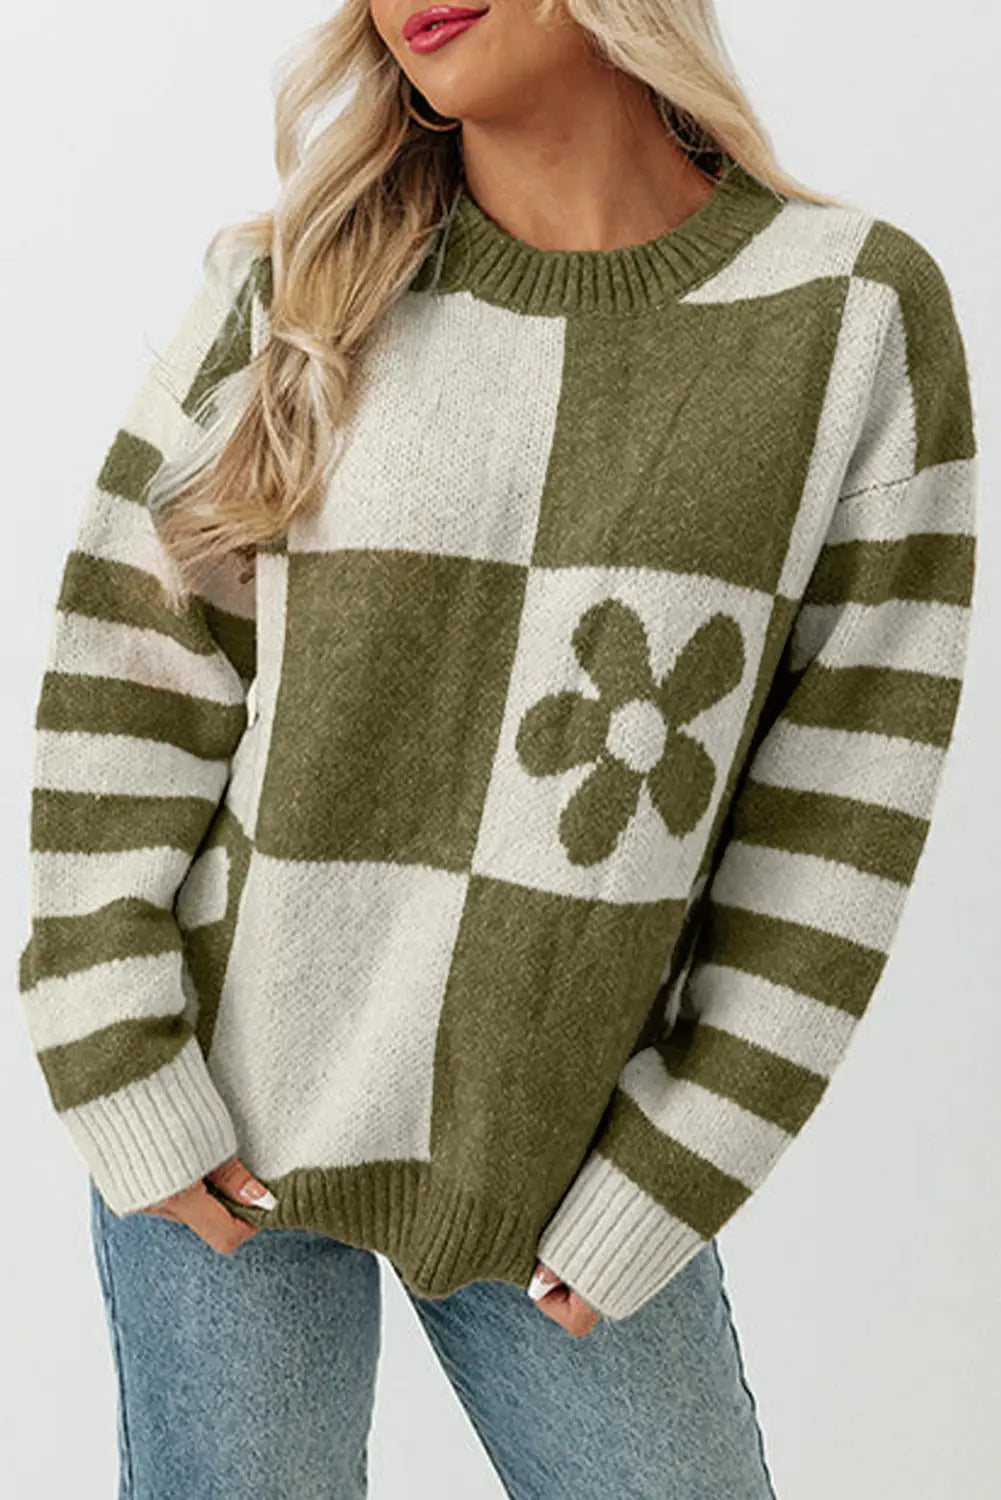 Brown checkered floral print striped sleeve sweater - mist green / s / 100% polyester - tops